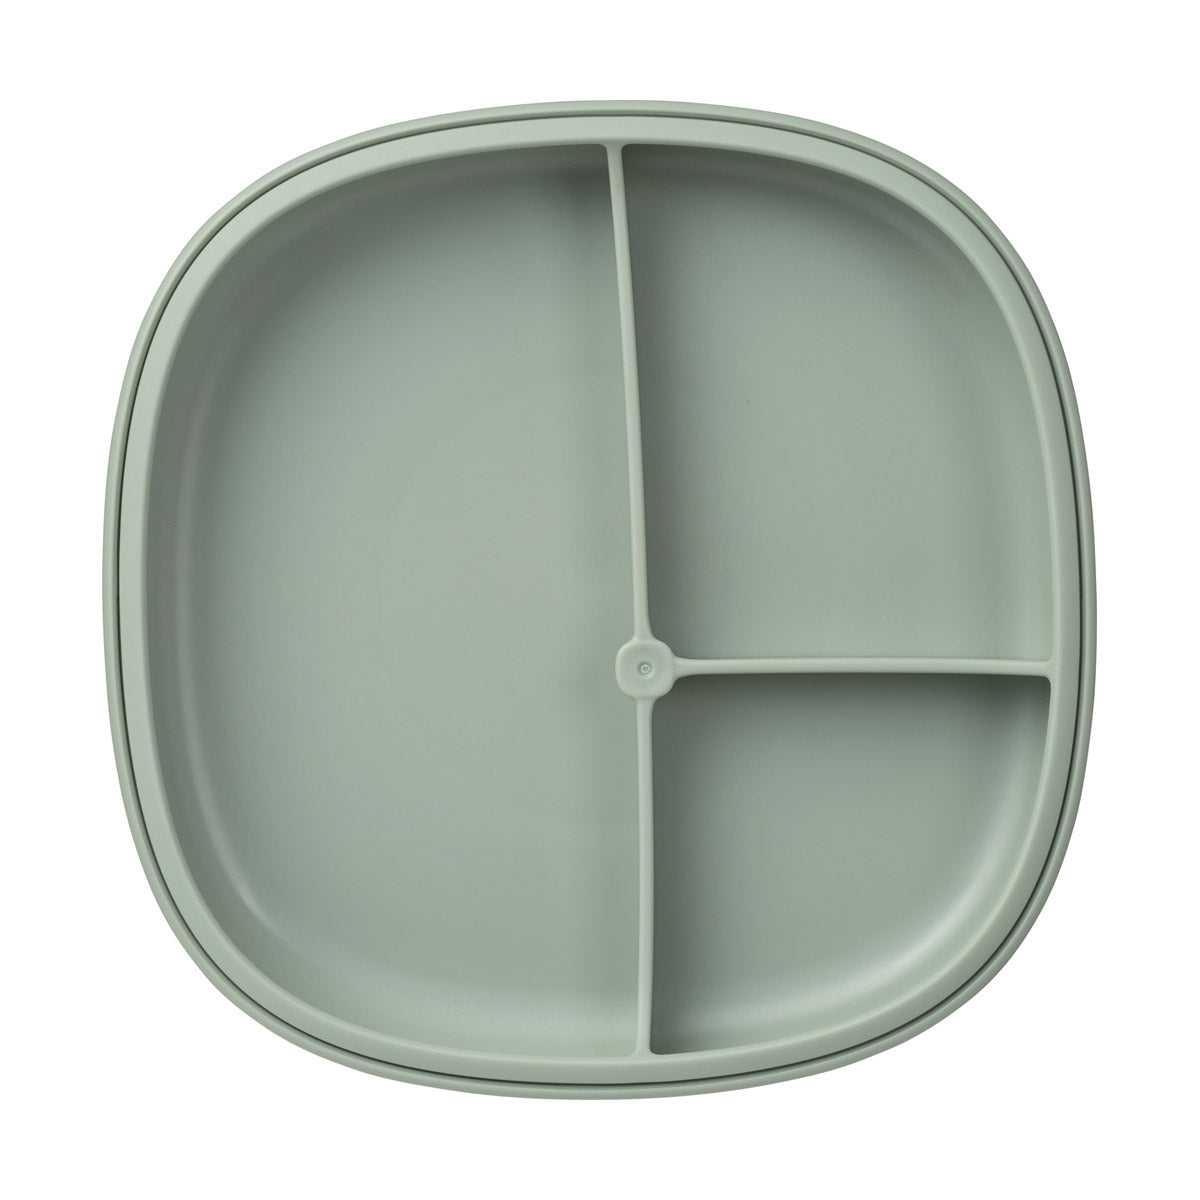 2 in 1 Suction Plate - Sage